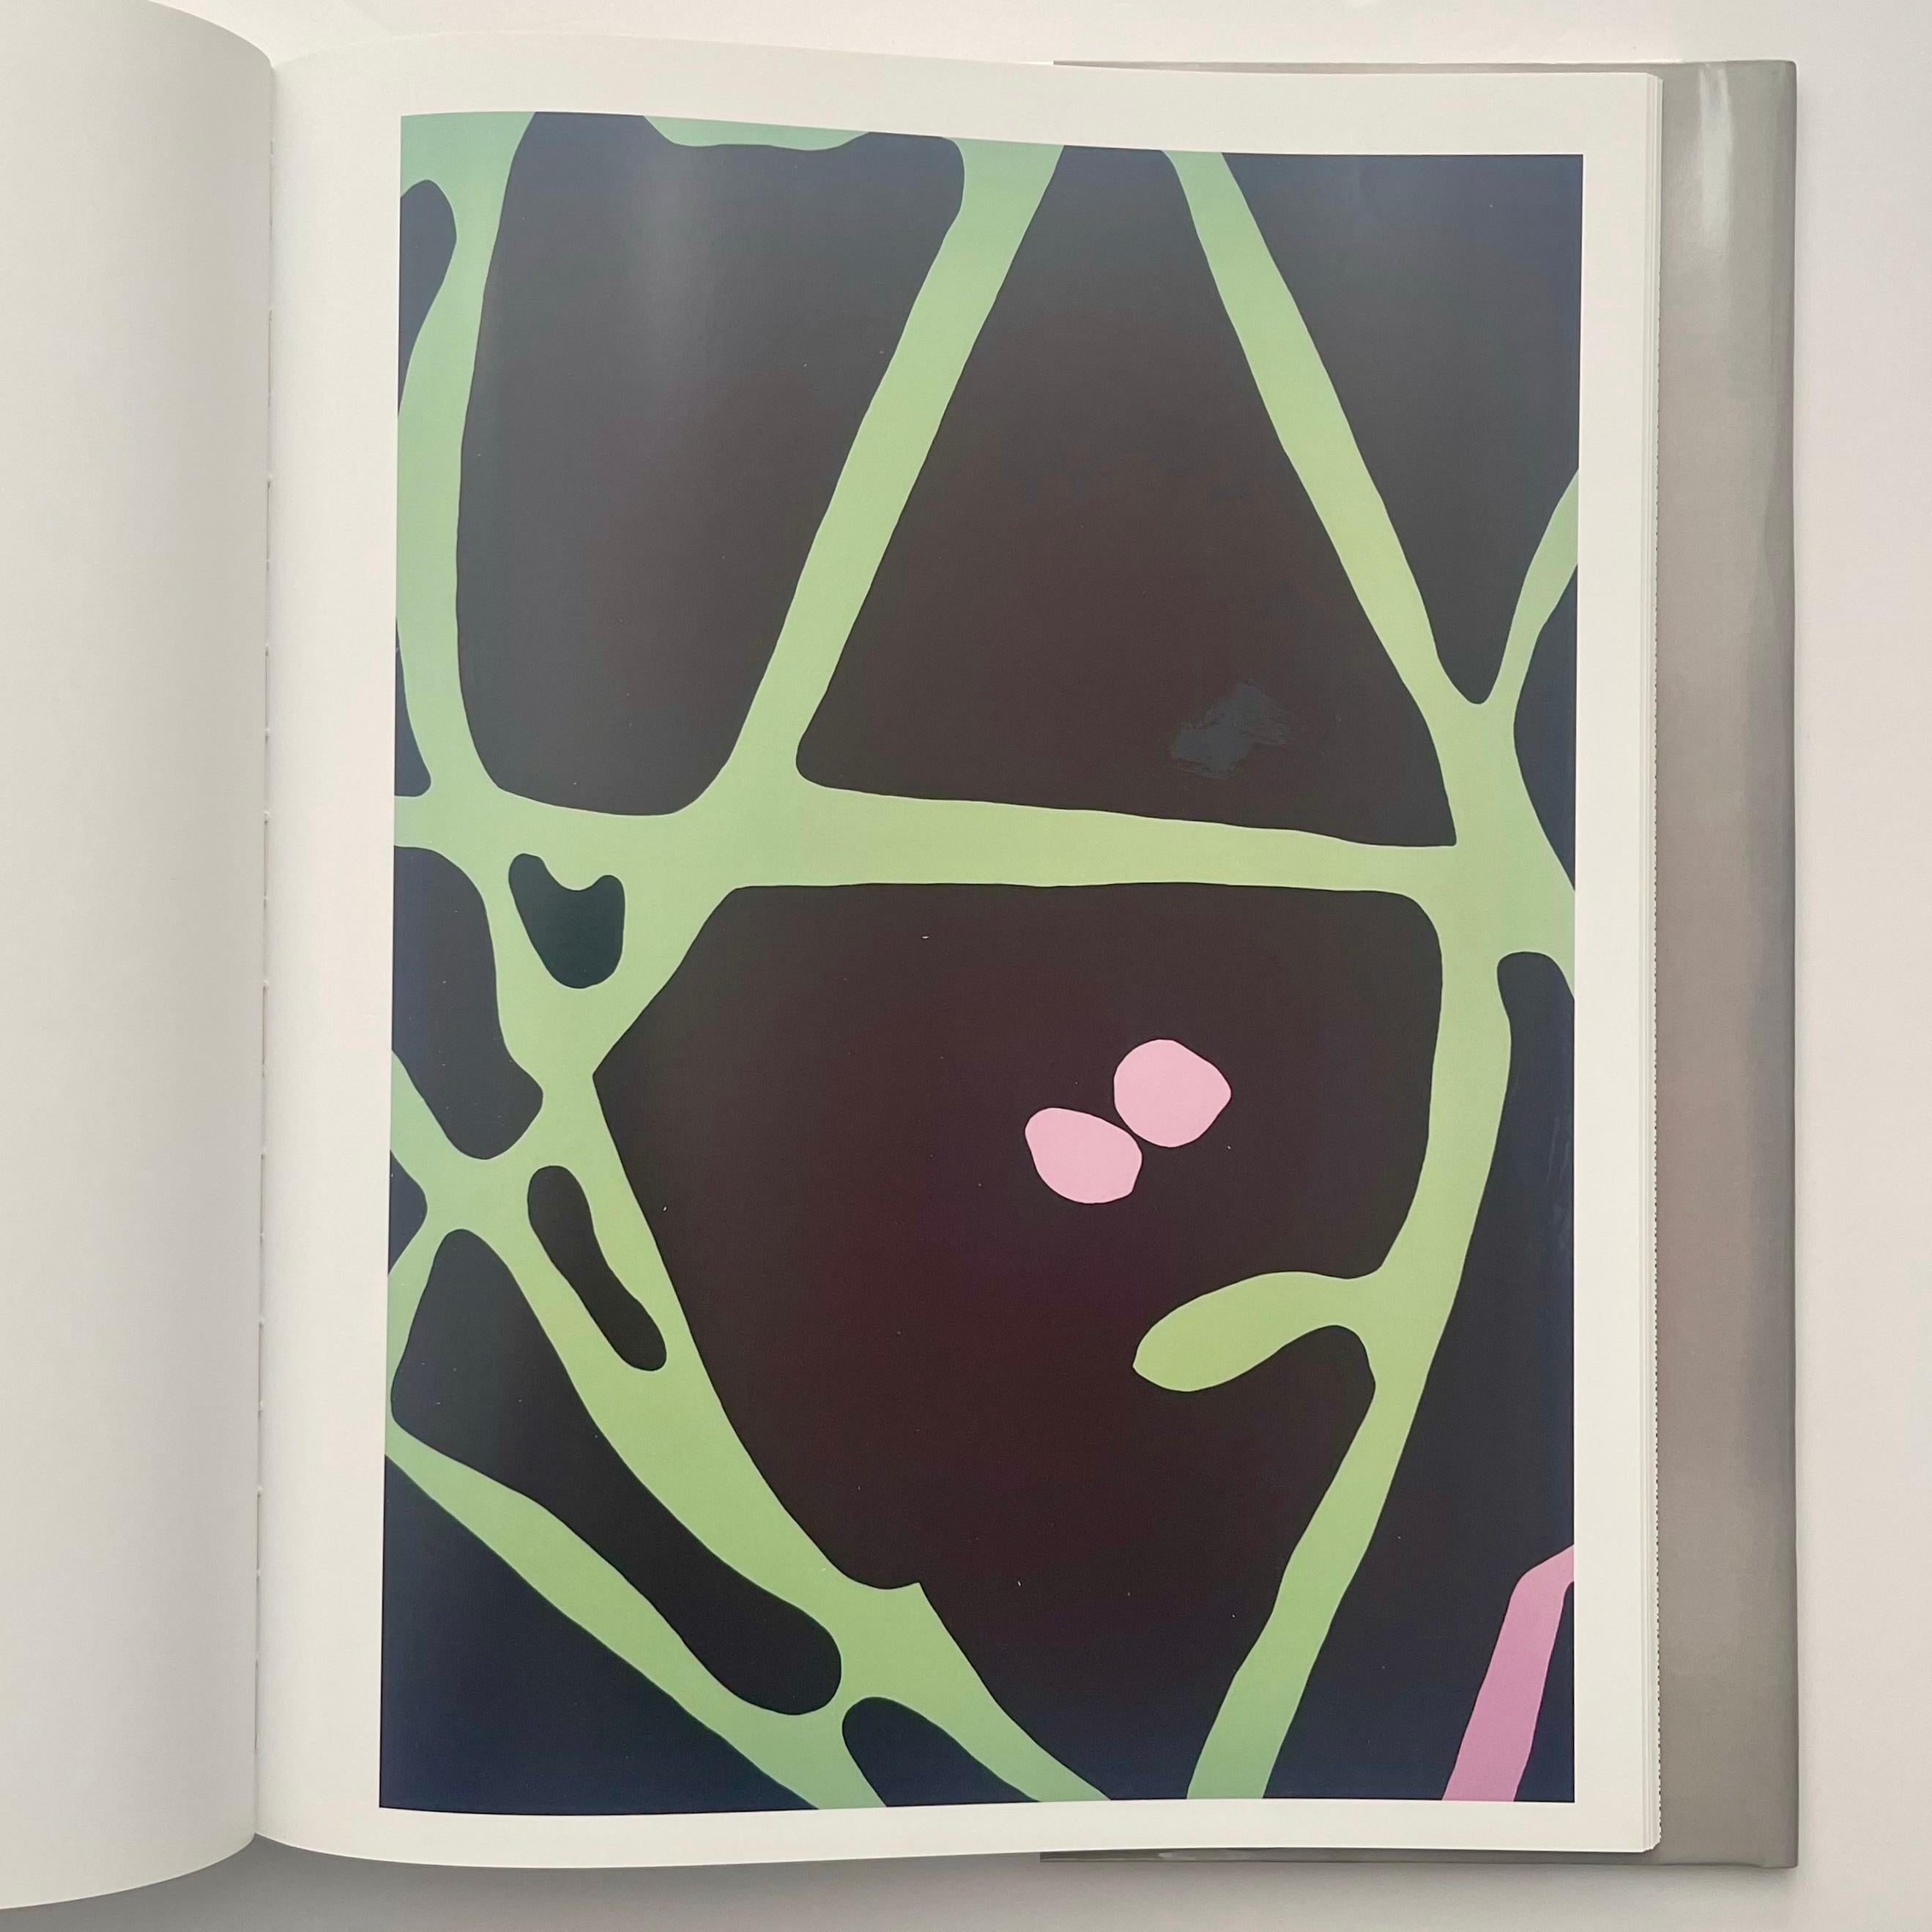 Gary Hume, A Cat on Lap, Monograph, 1st Edition 2009 3